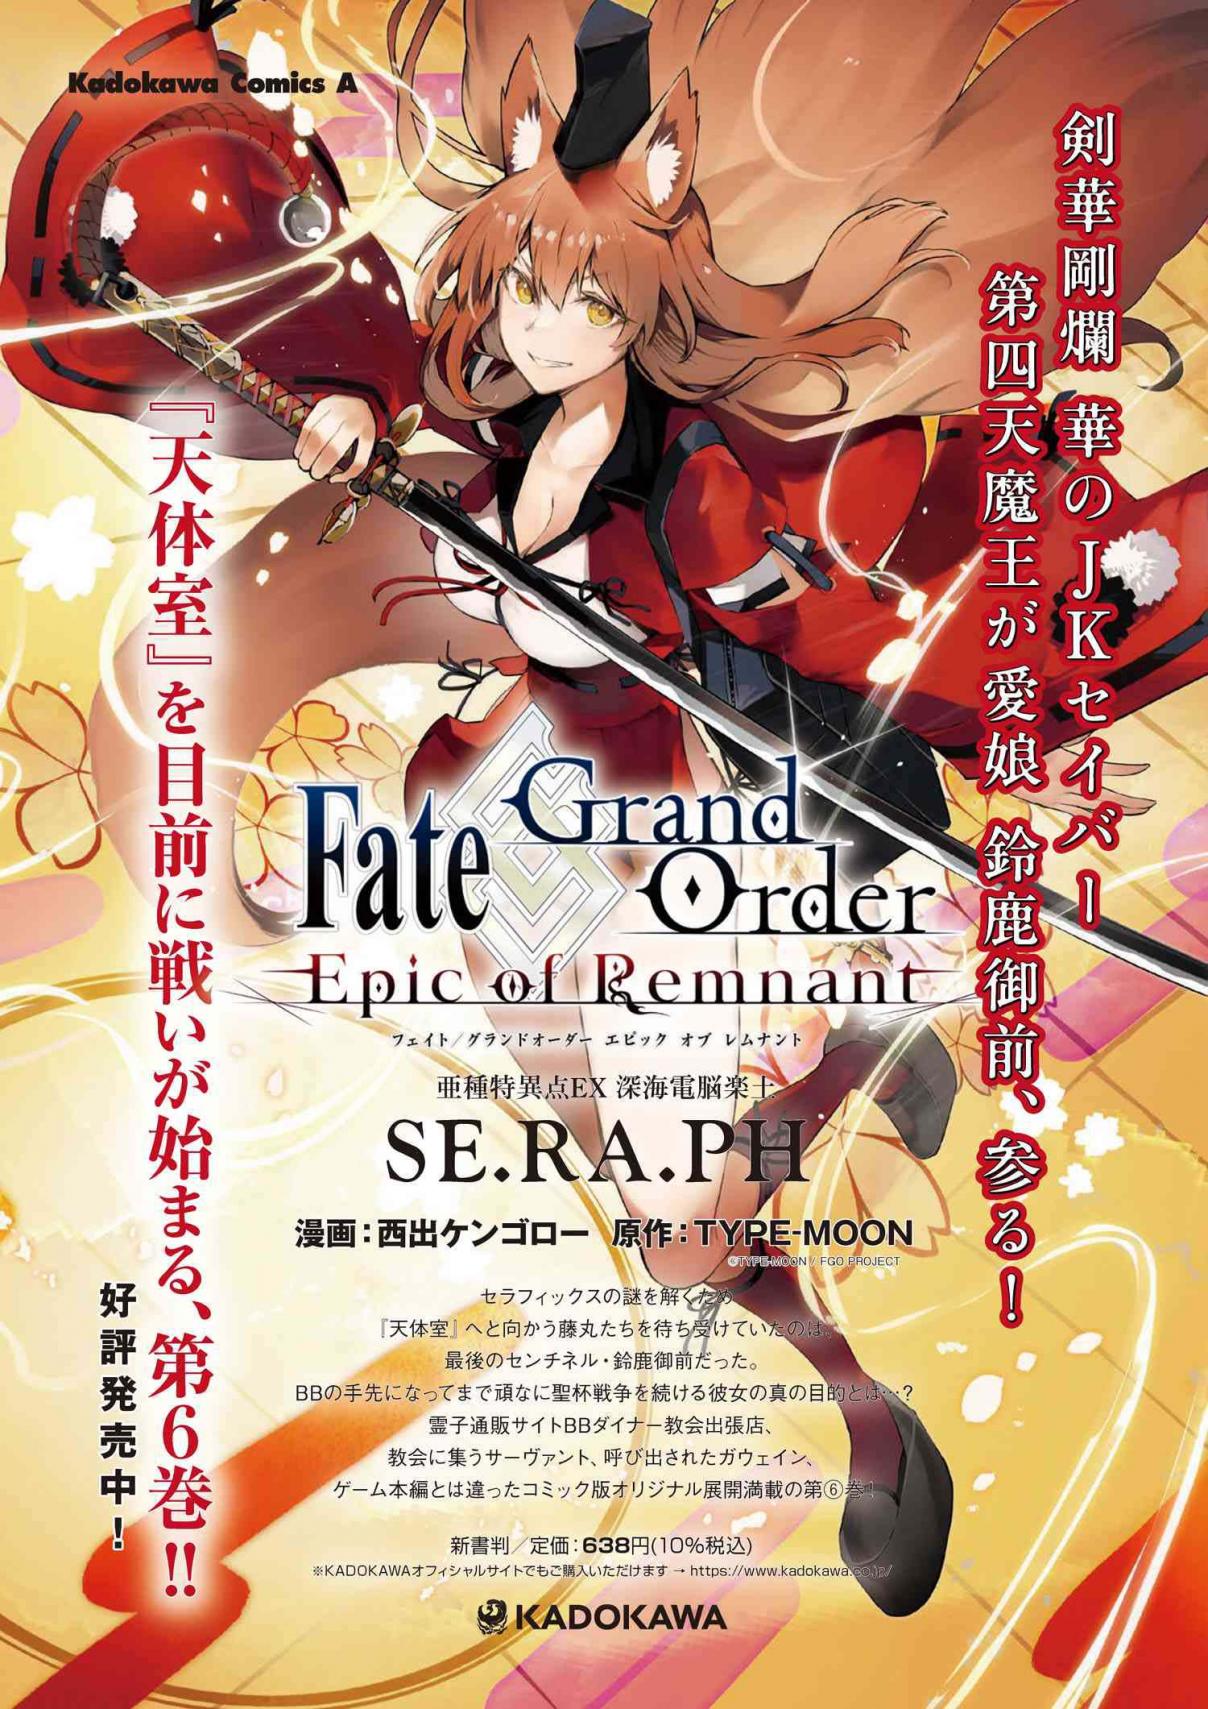 Fate/Grand Order -Epic of Remnant- Deep Sea Cyber-Paradise, SE.RA.PH 28.2